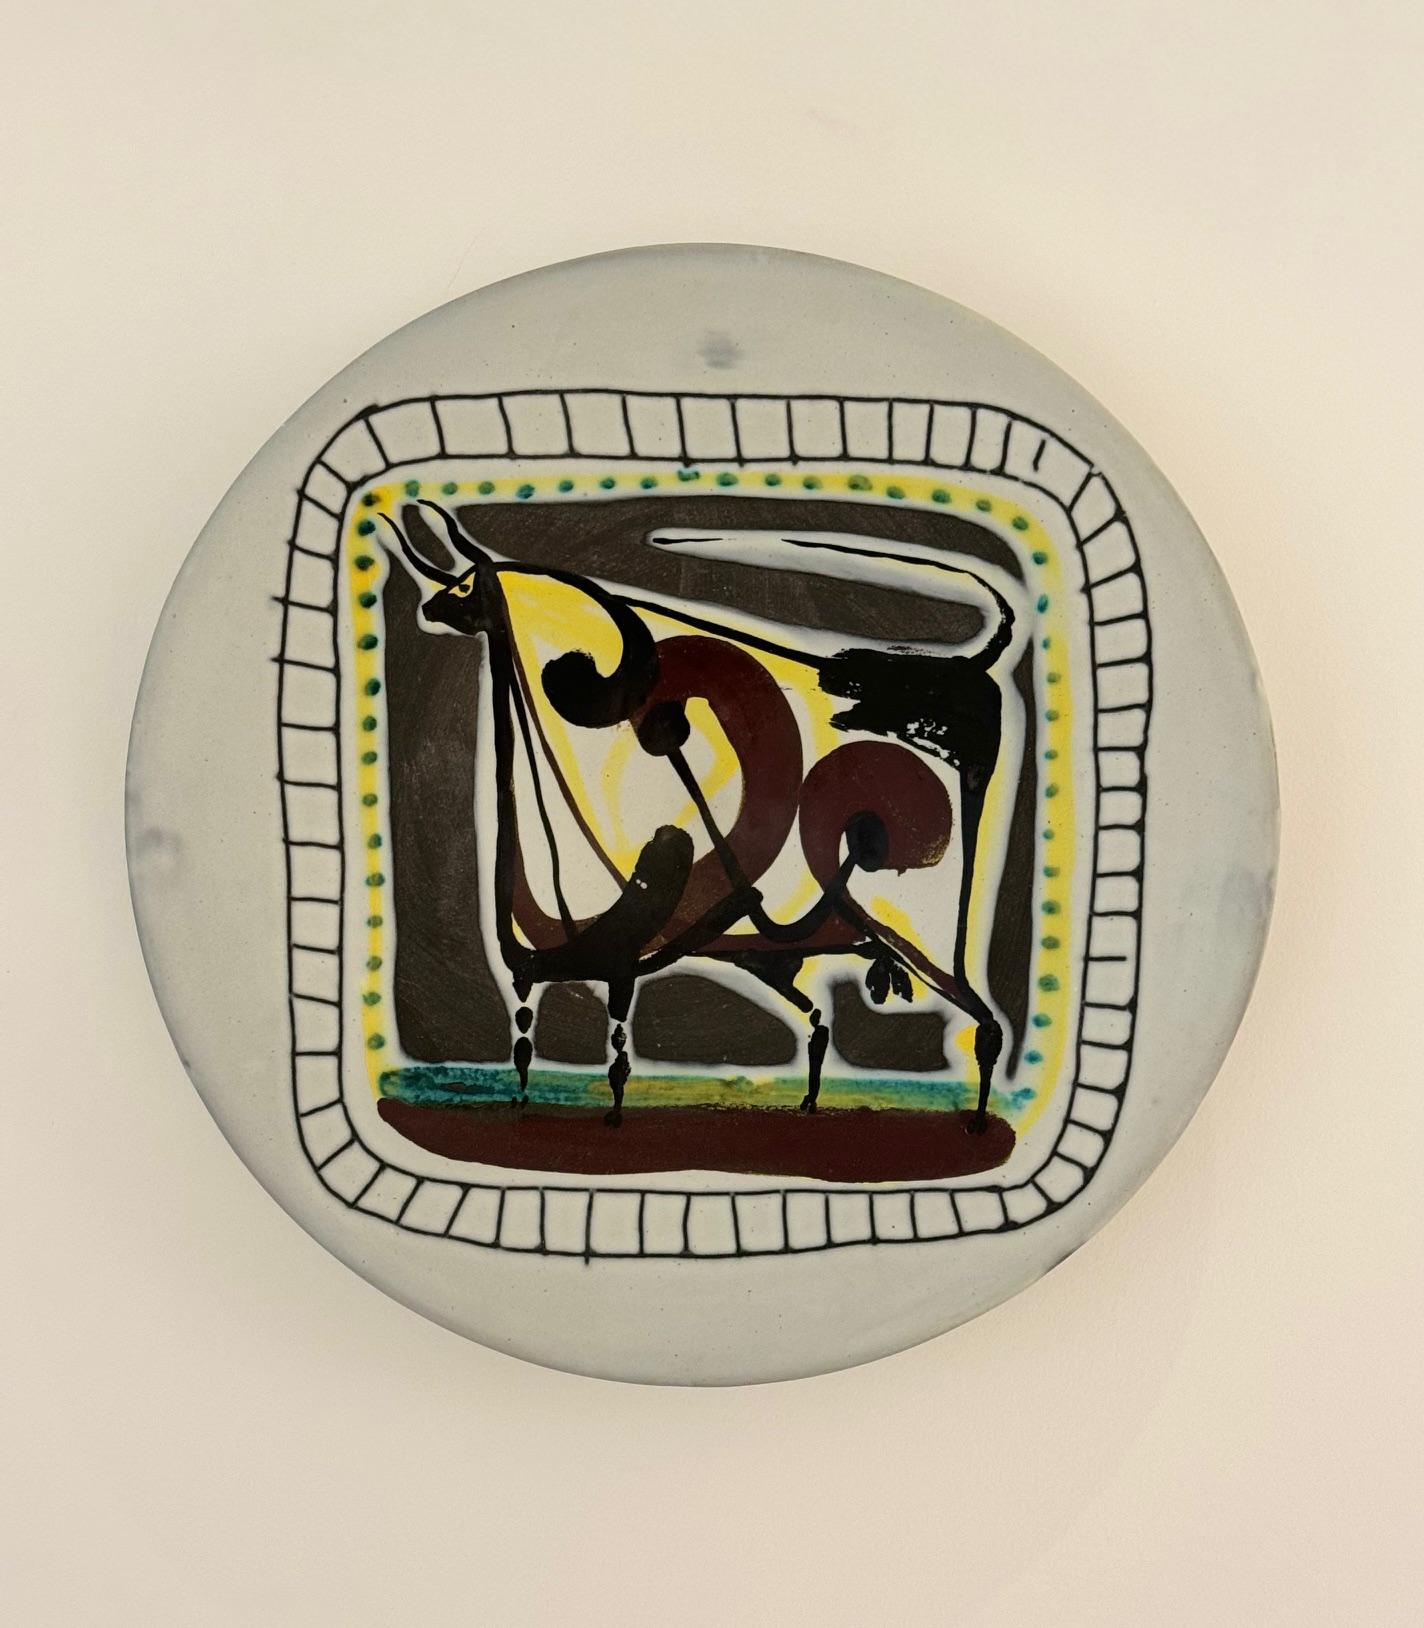 Roger Capron (1922-2006)
Roger Capron studied at Art appliqués of Paris from 1938 to 1943 before teaching drawing in the same establishment from 1945. In 1946, he settled in Vallauris where he created a ceramic workshop.
Large dish, faience tin